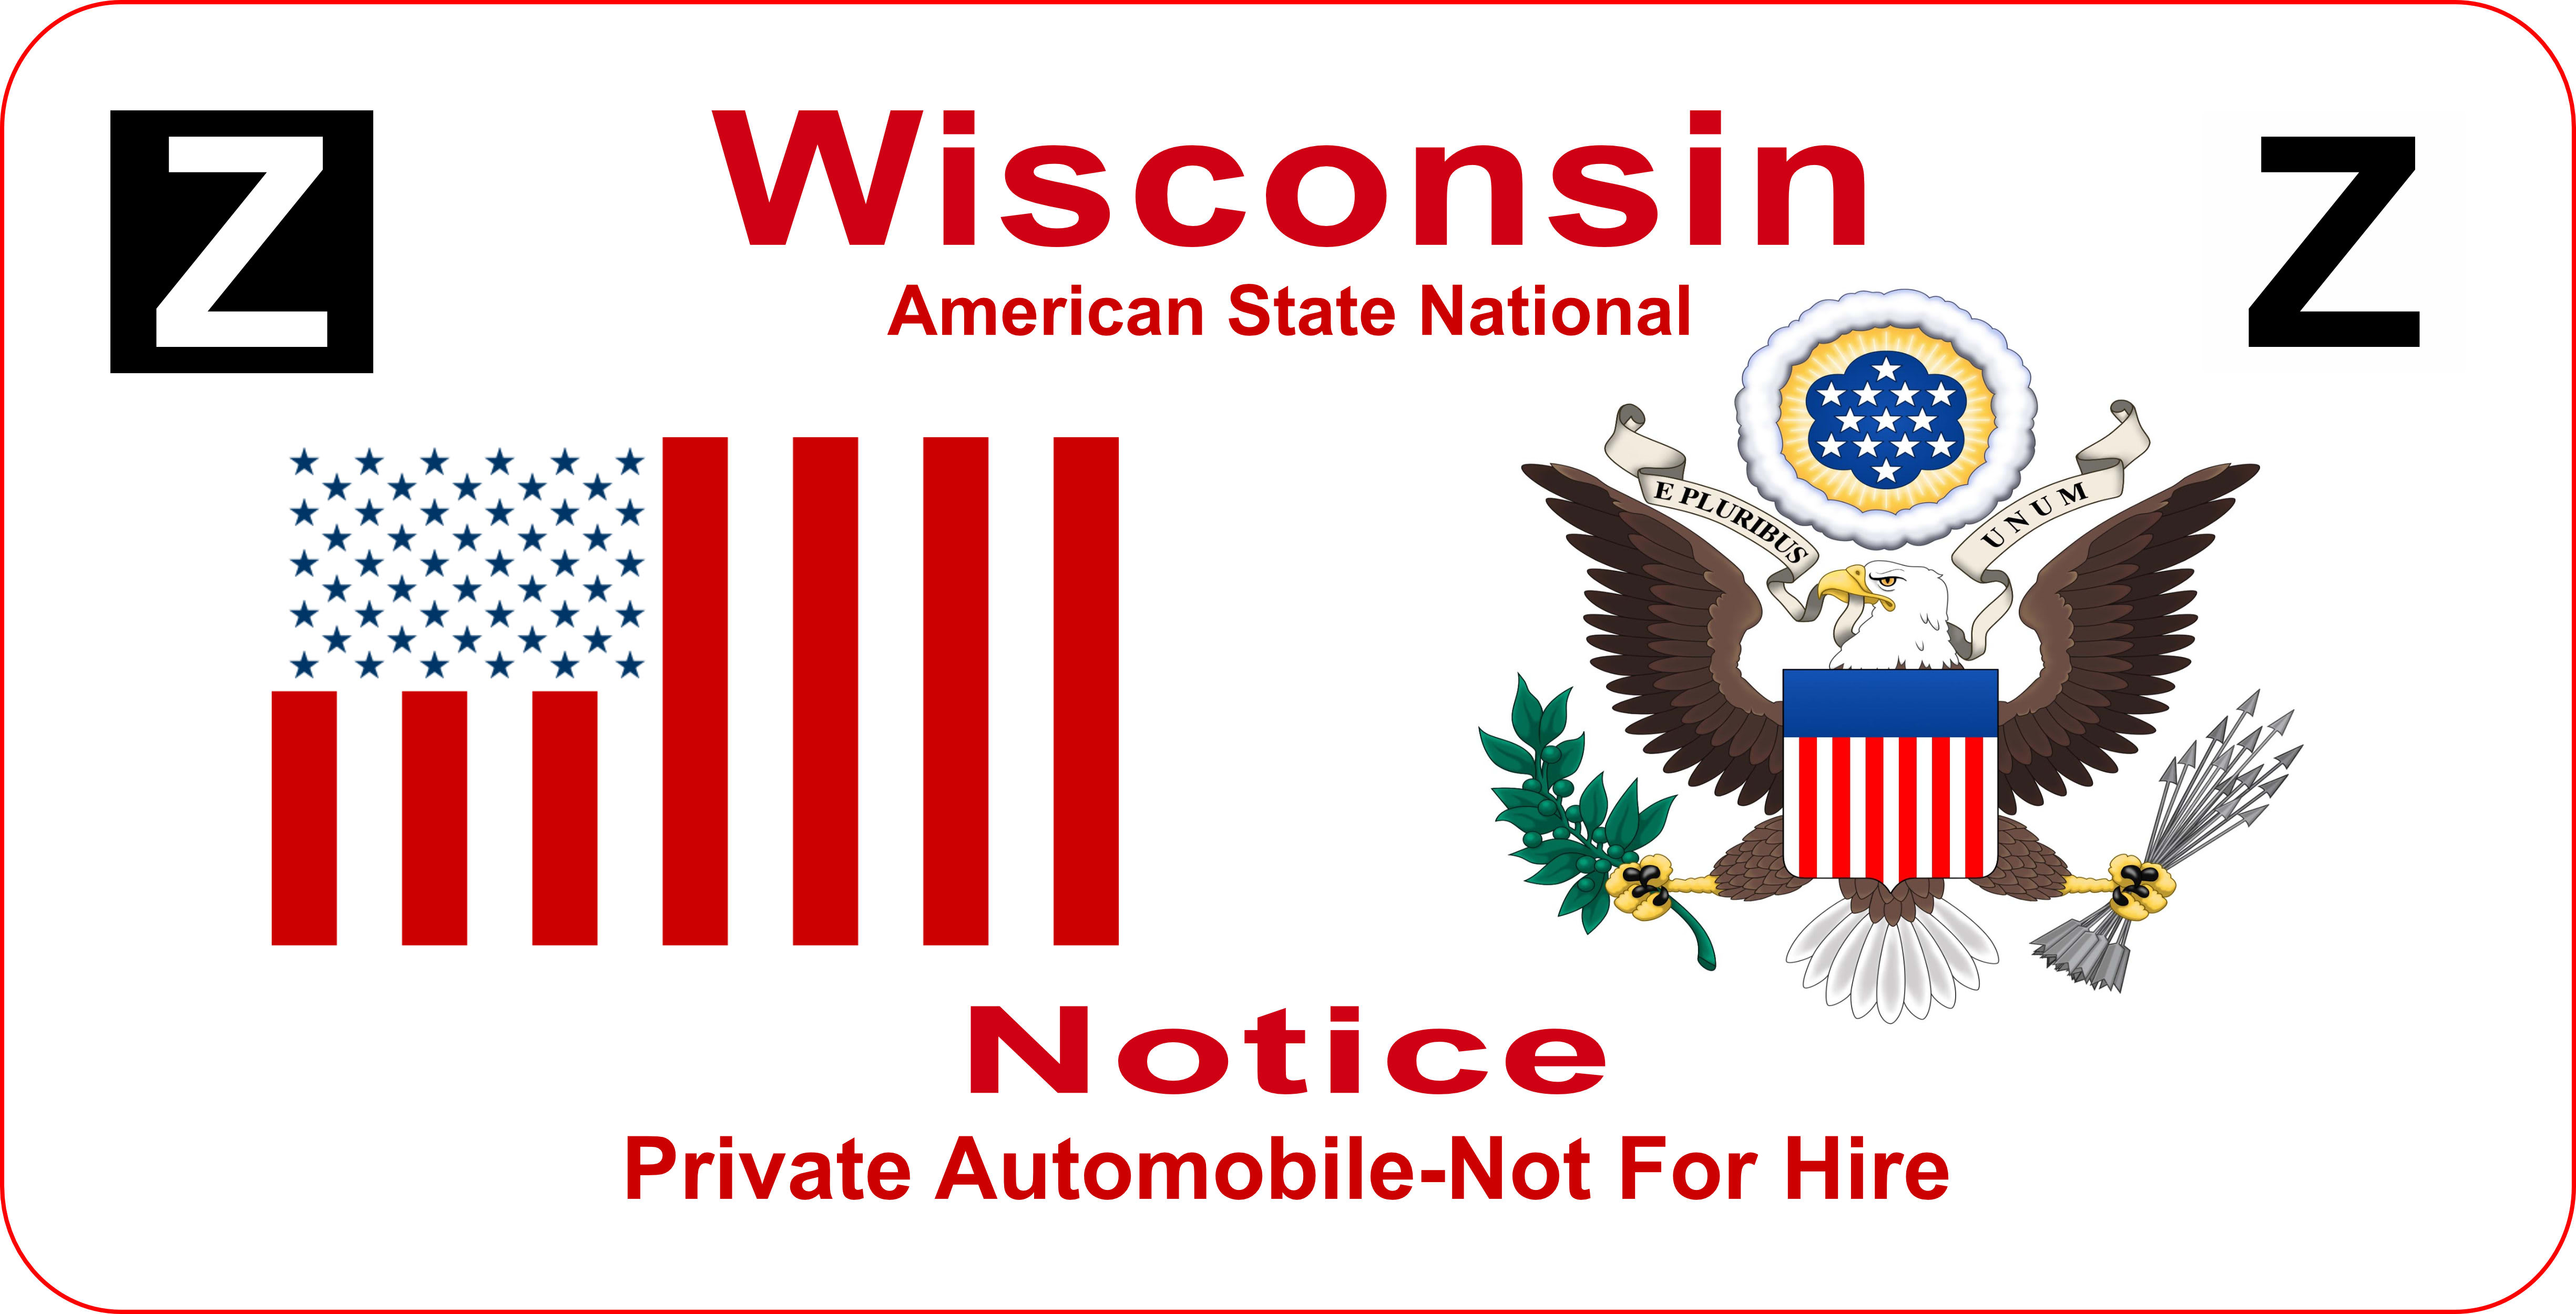 z-plate-wisconsin-american-state-national-wisconsin-asn-plates-and